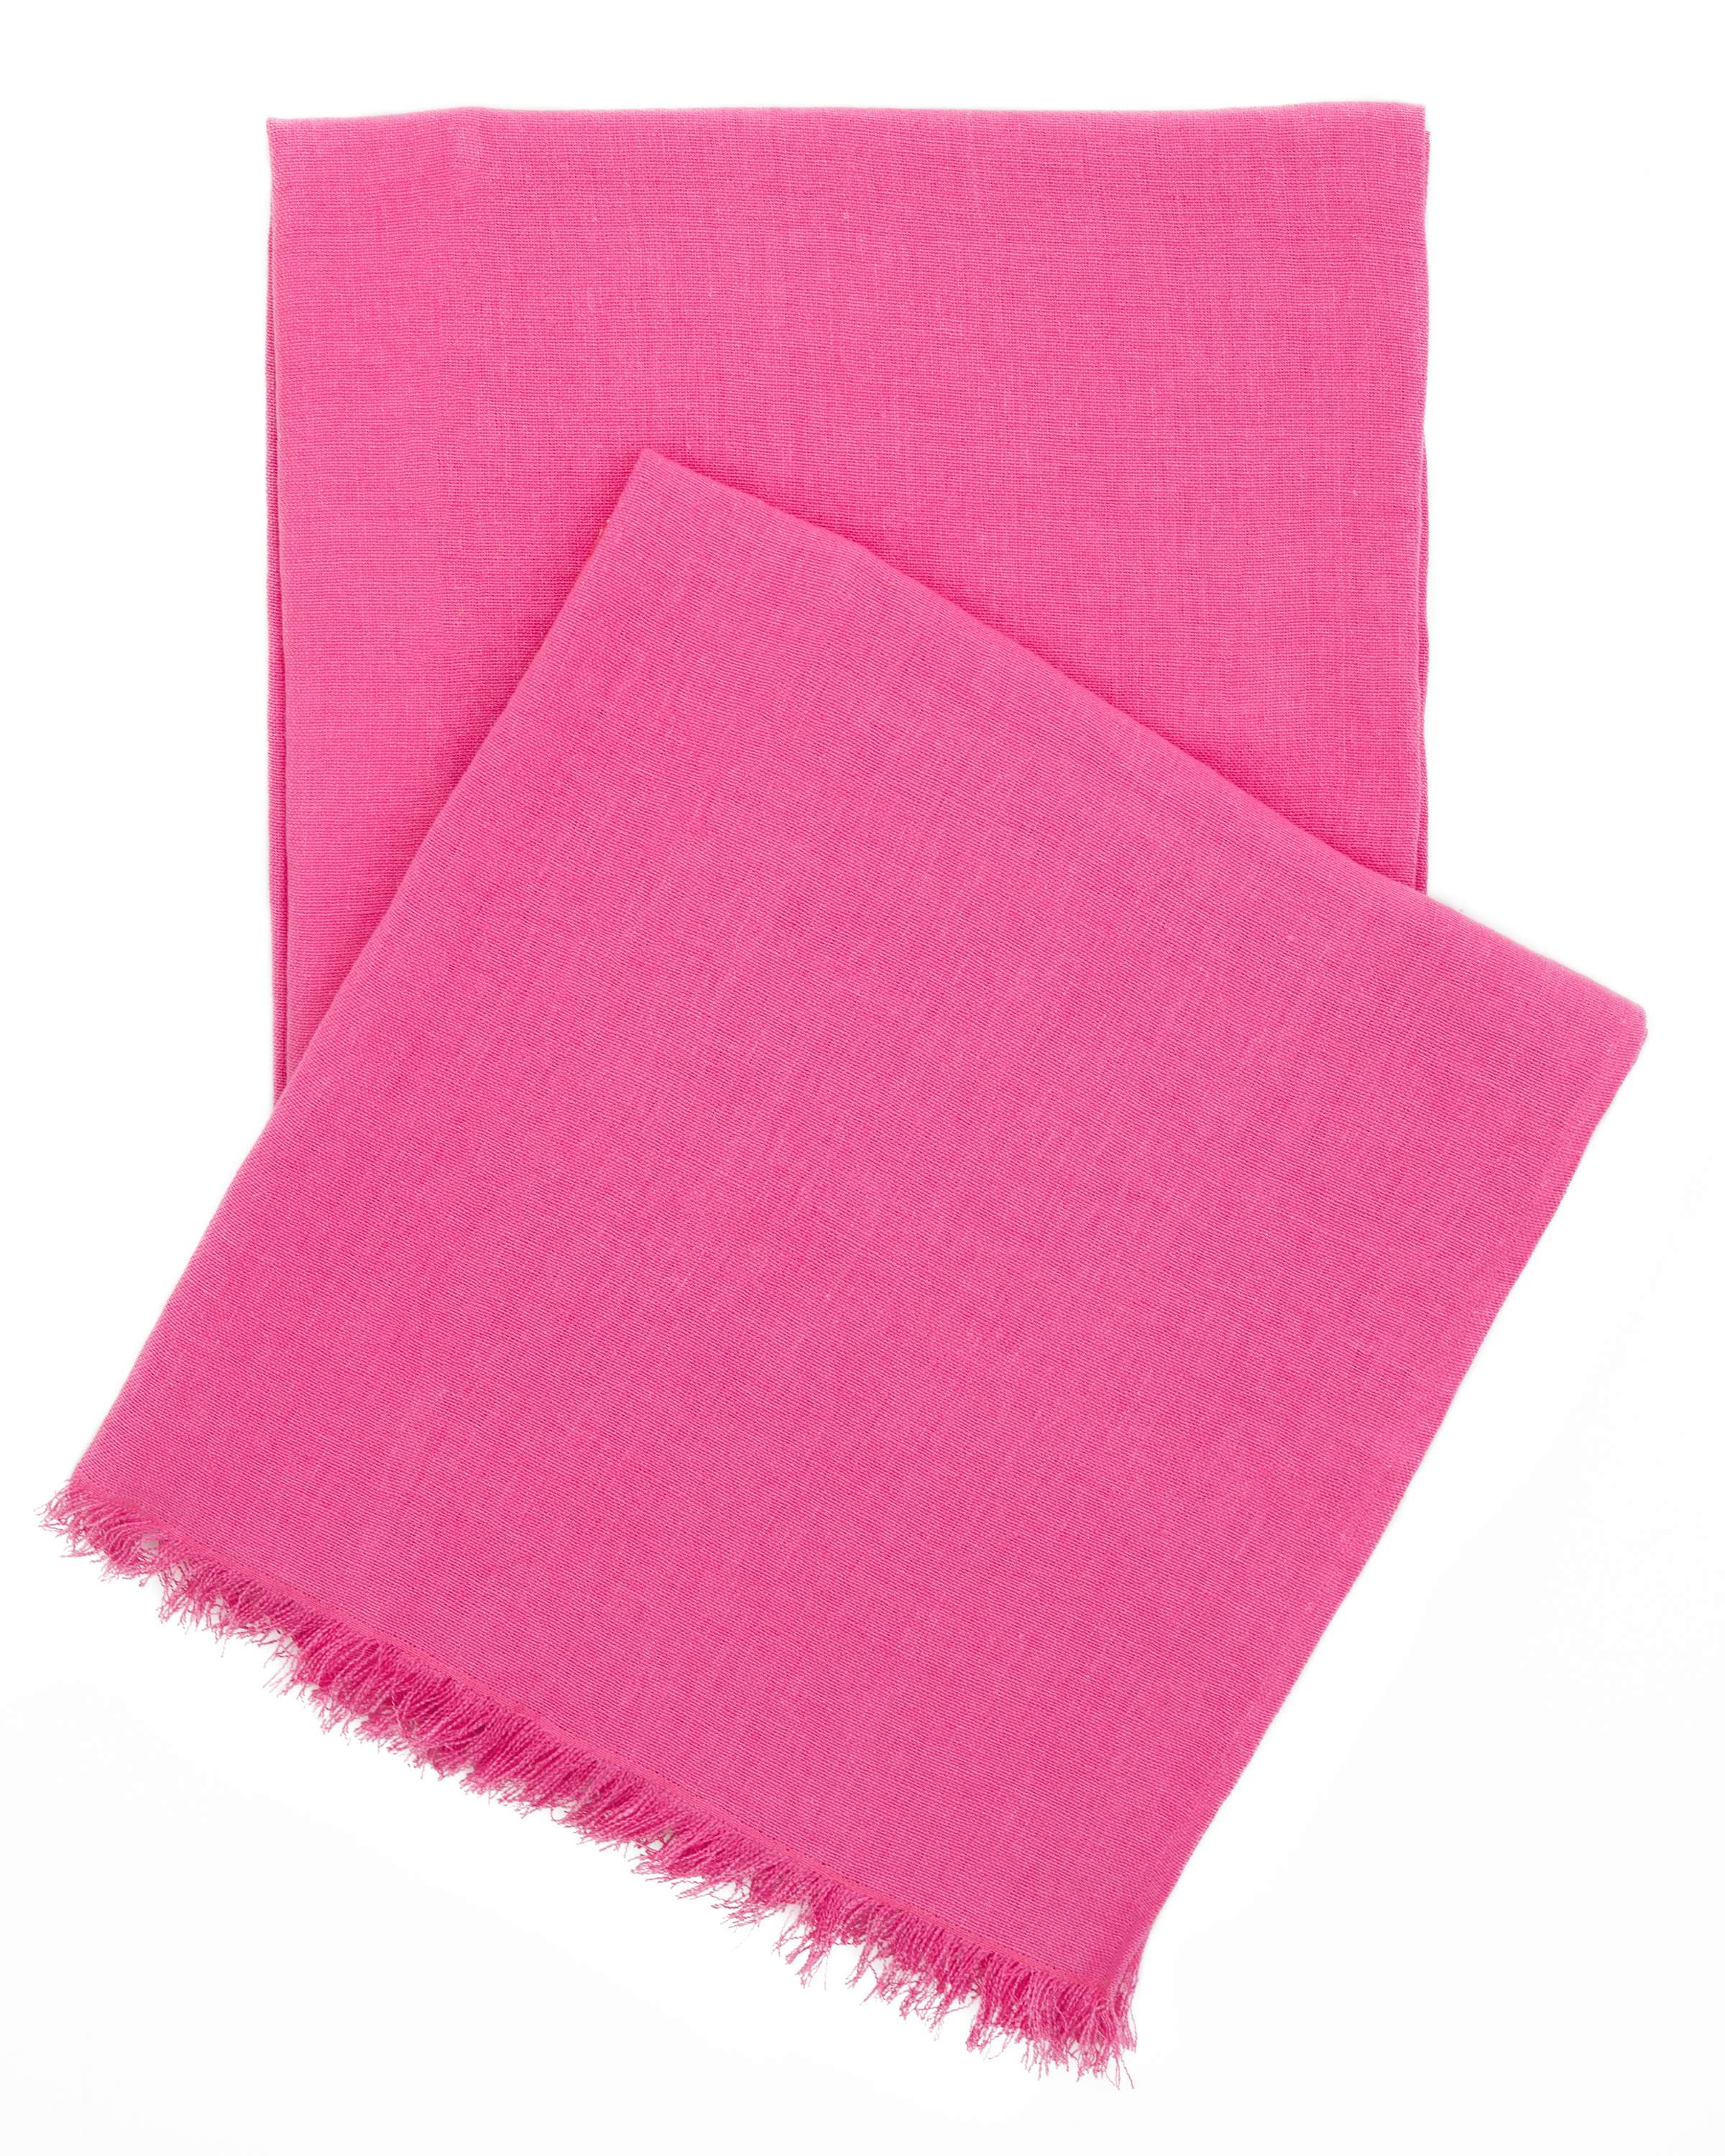 Stone Washed Linen Fuchsia Throw | Pine Cone Hill